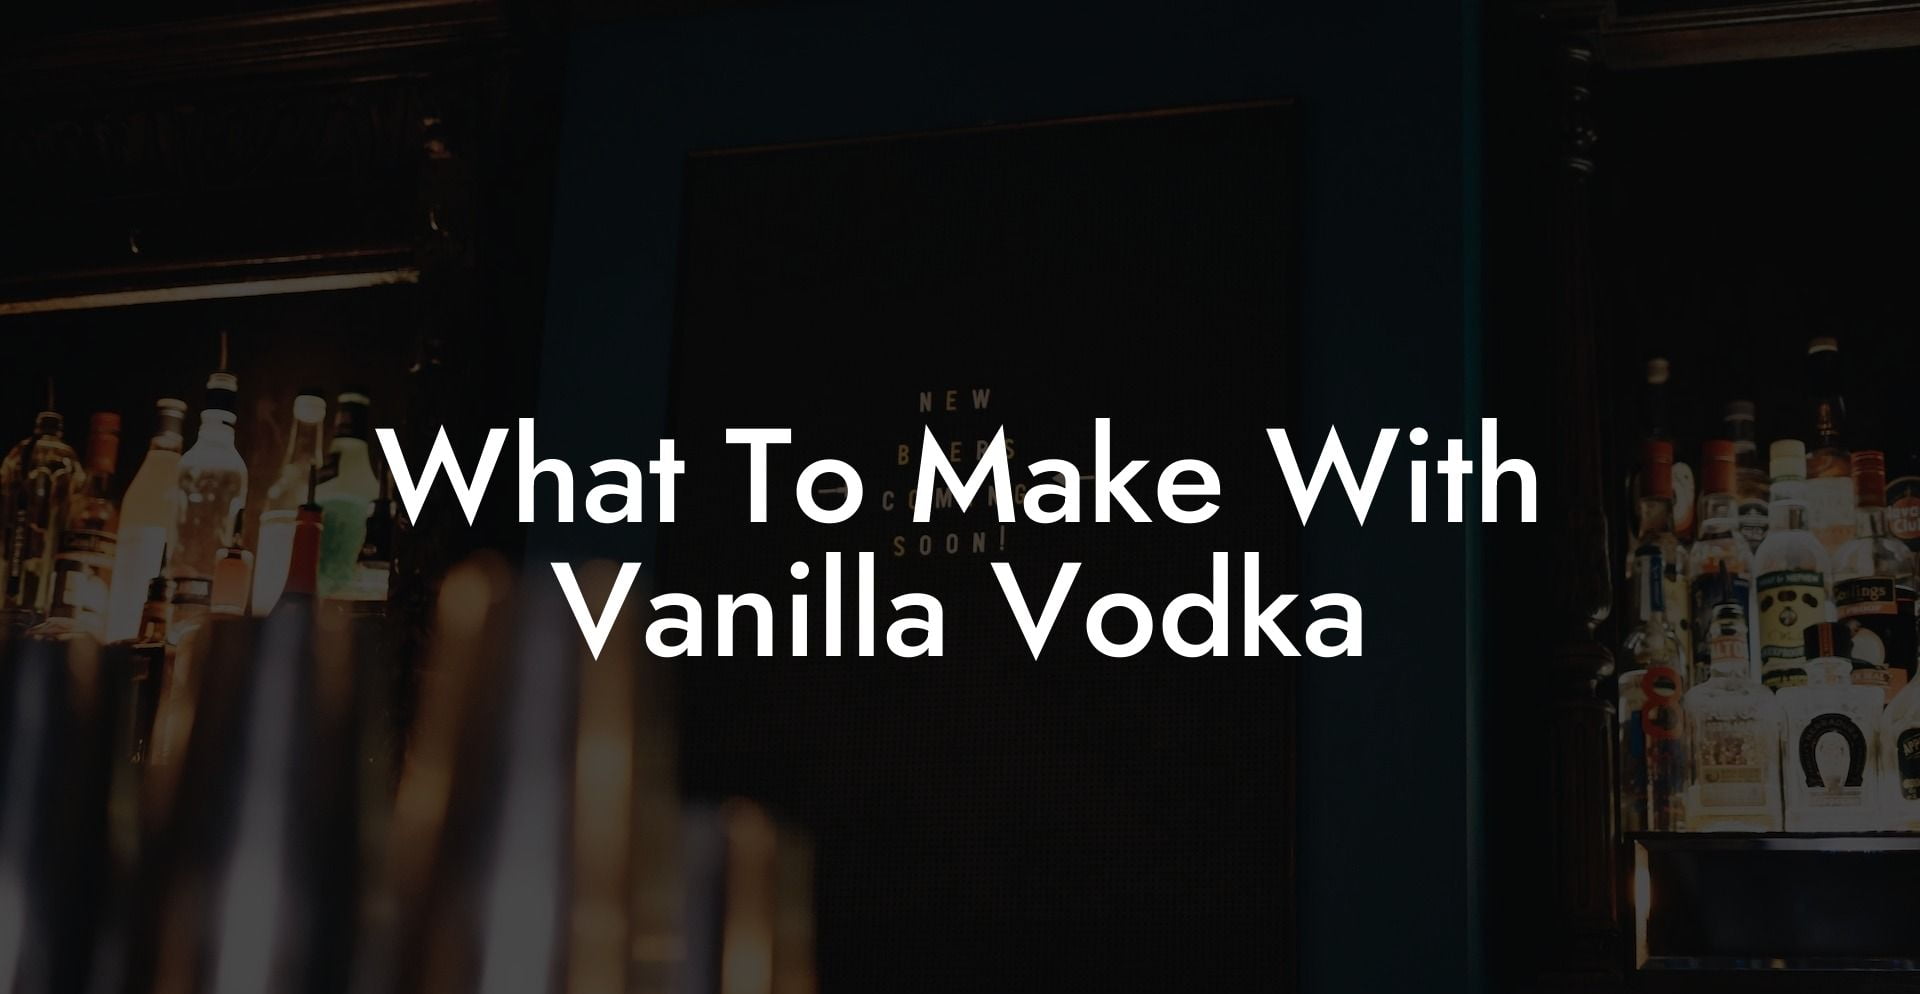 What To Make With Vanilla Vodka